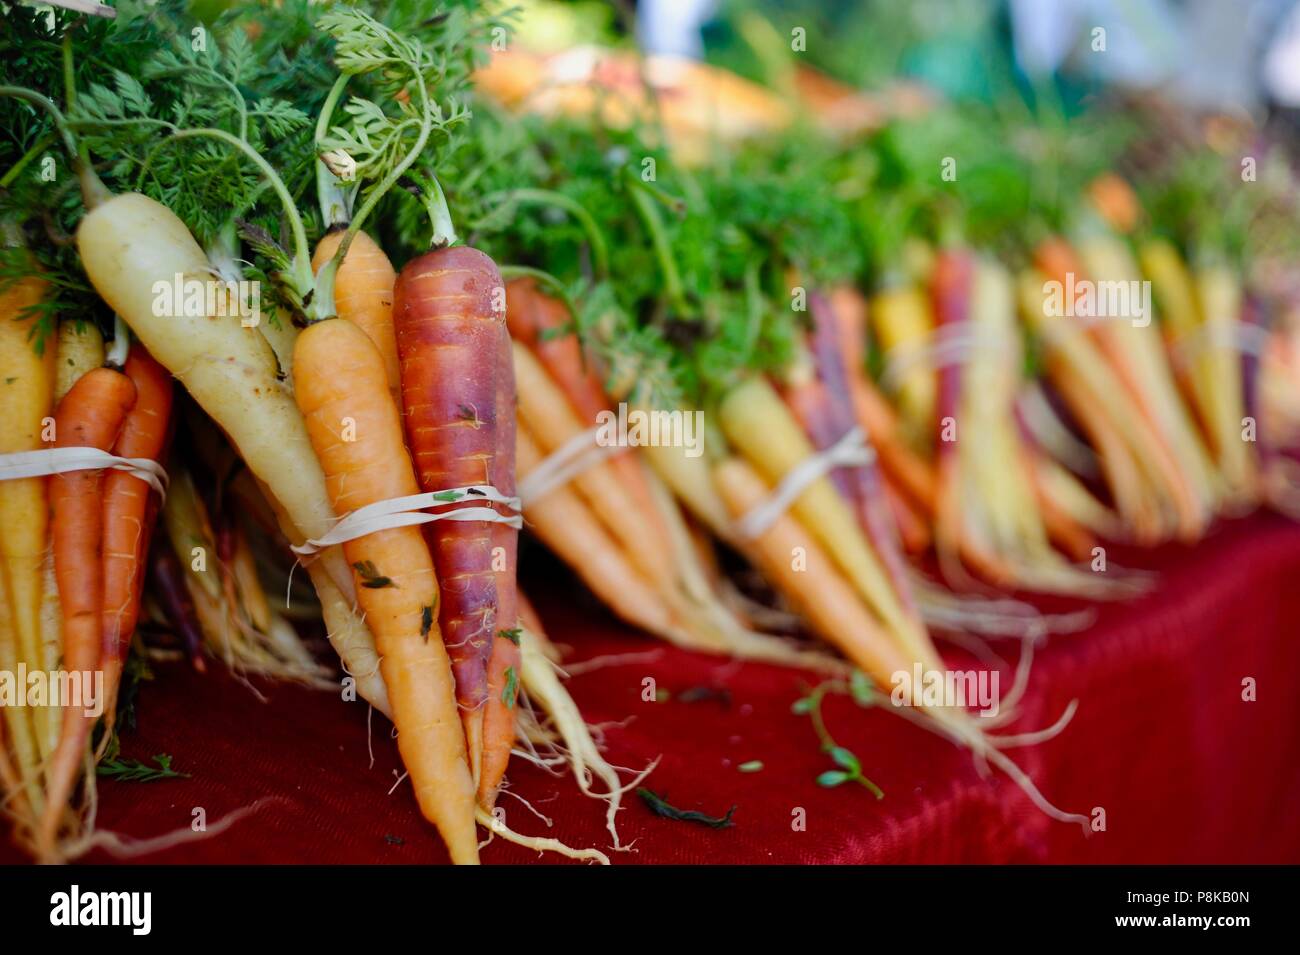 Tidy bundles of rainbow carrots (multicolored) at the Walker Farms farmstand for sale at farmers market in Savannah, Georgia, USA Stock Photo